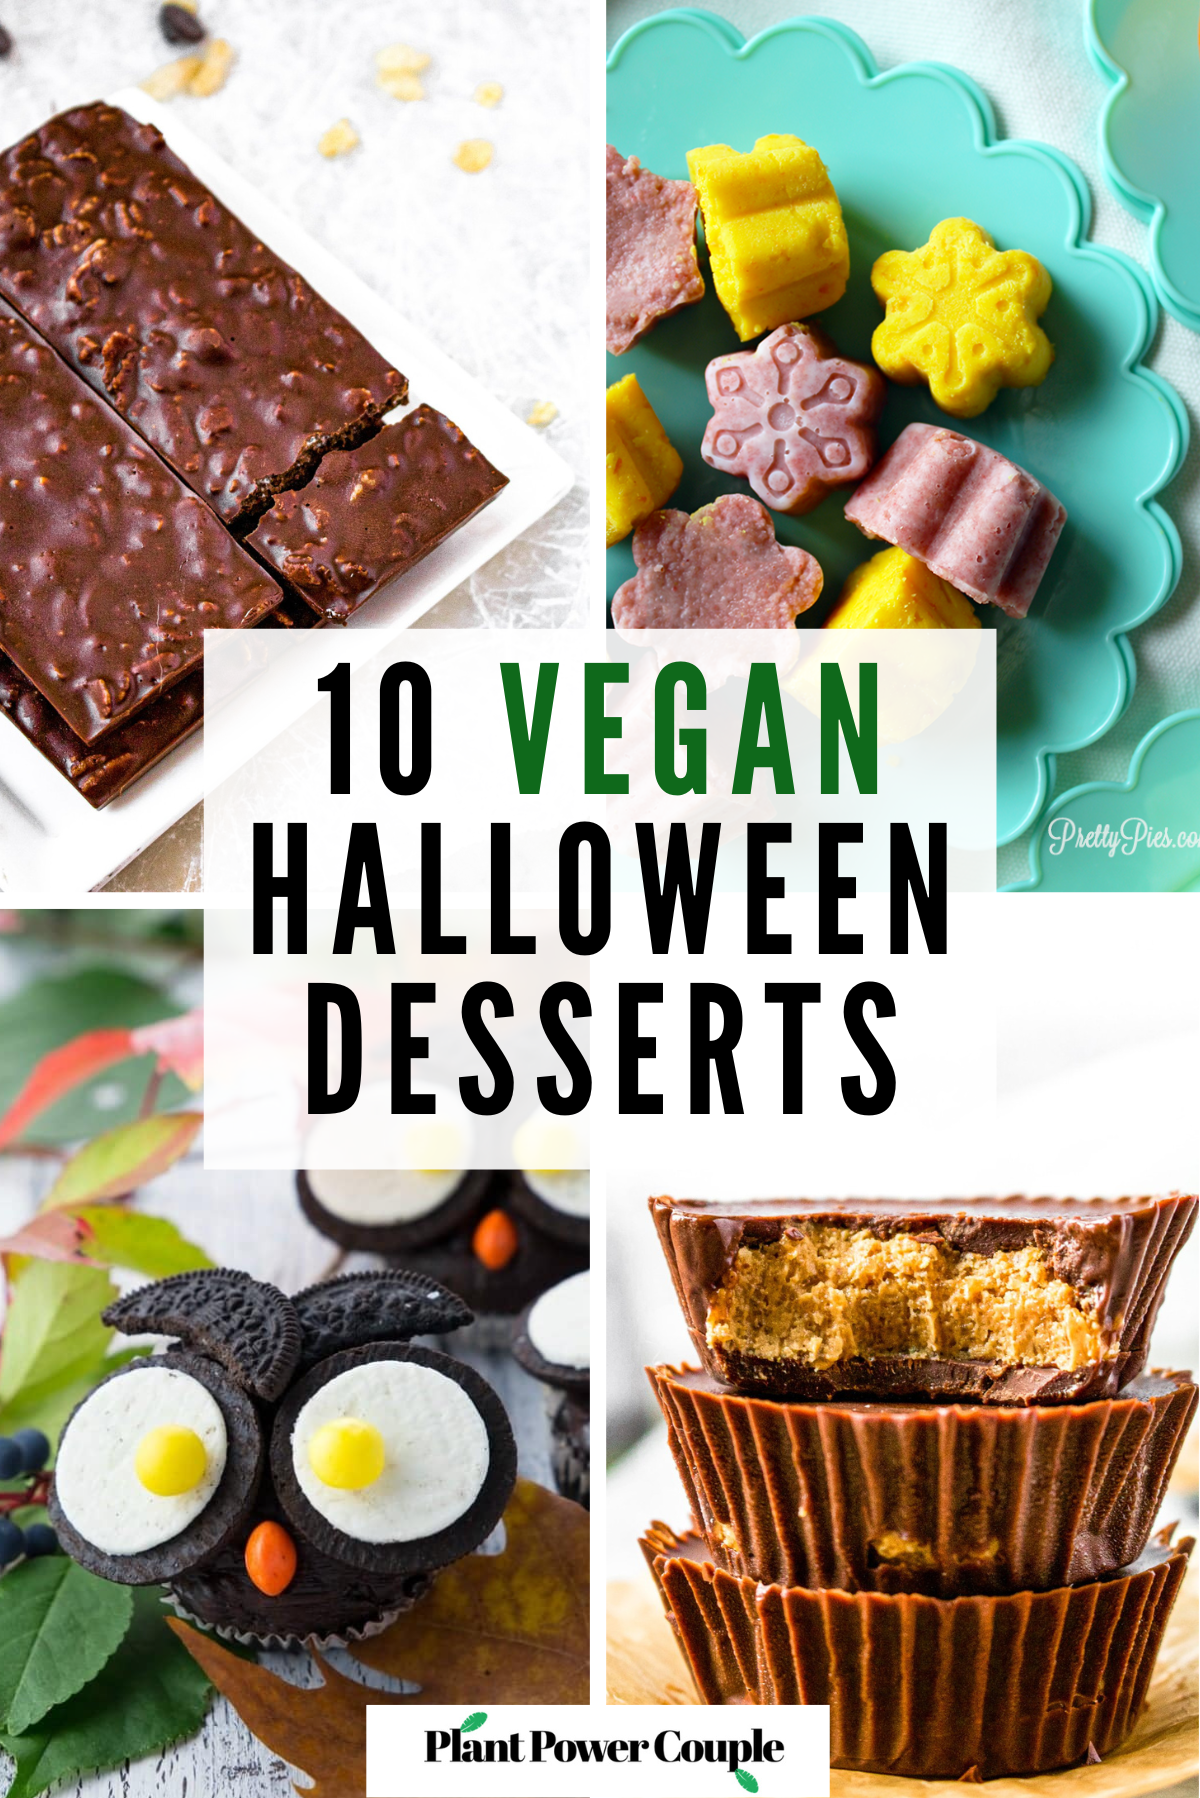 A grid with four photos: crunch bars on a square plate, starburst on a round teal plate, owl cupcakes, and a stack of peanut butter cups. Text reads: 10 vegan halloween desserts